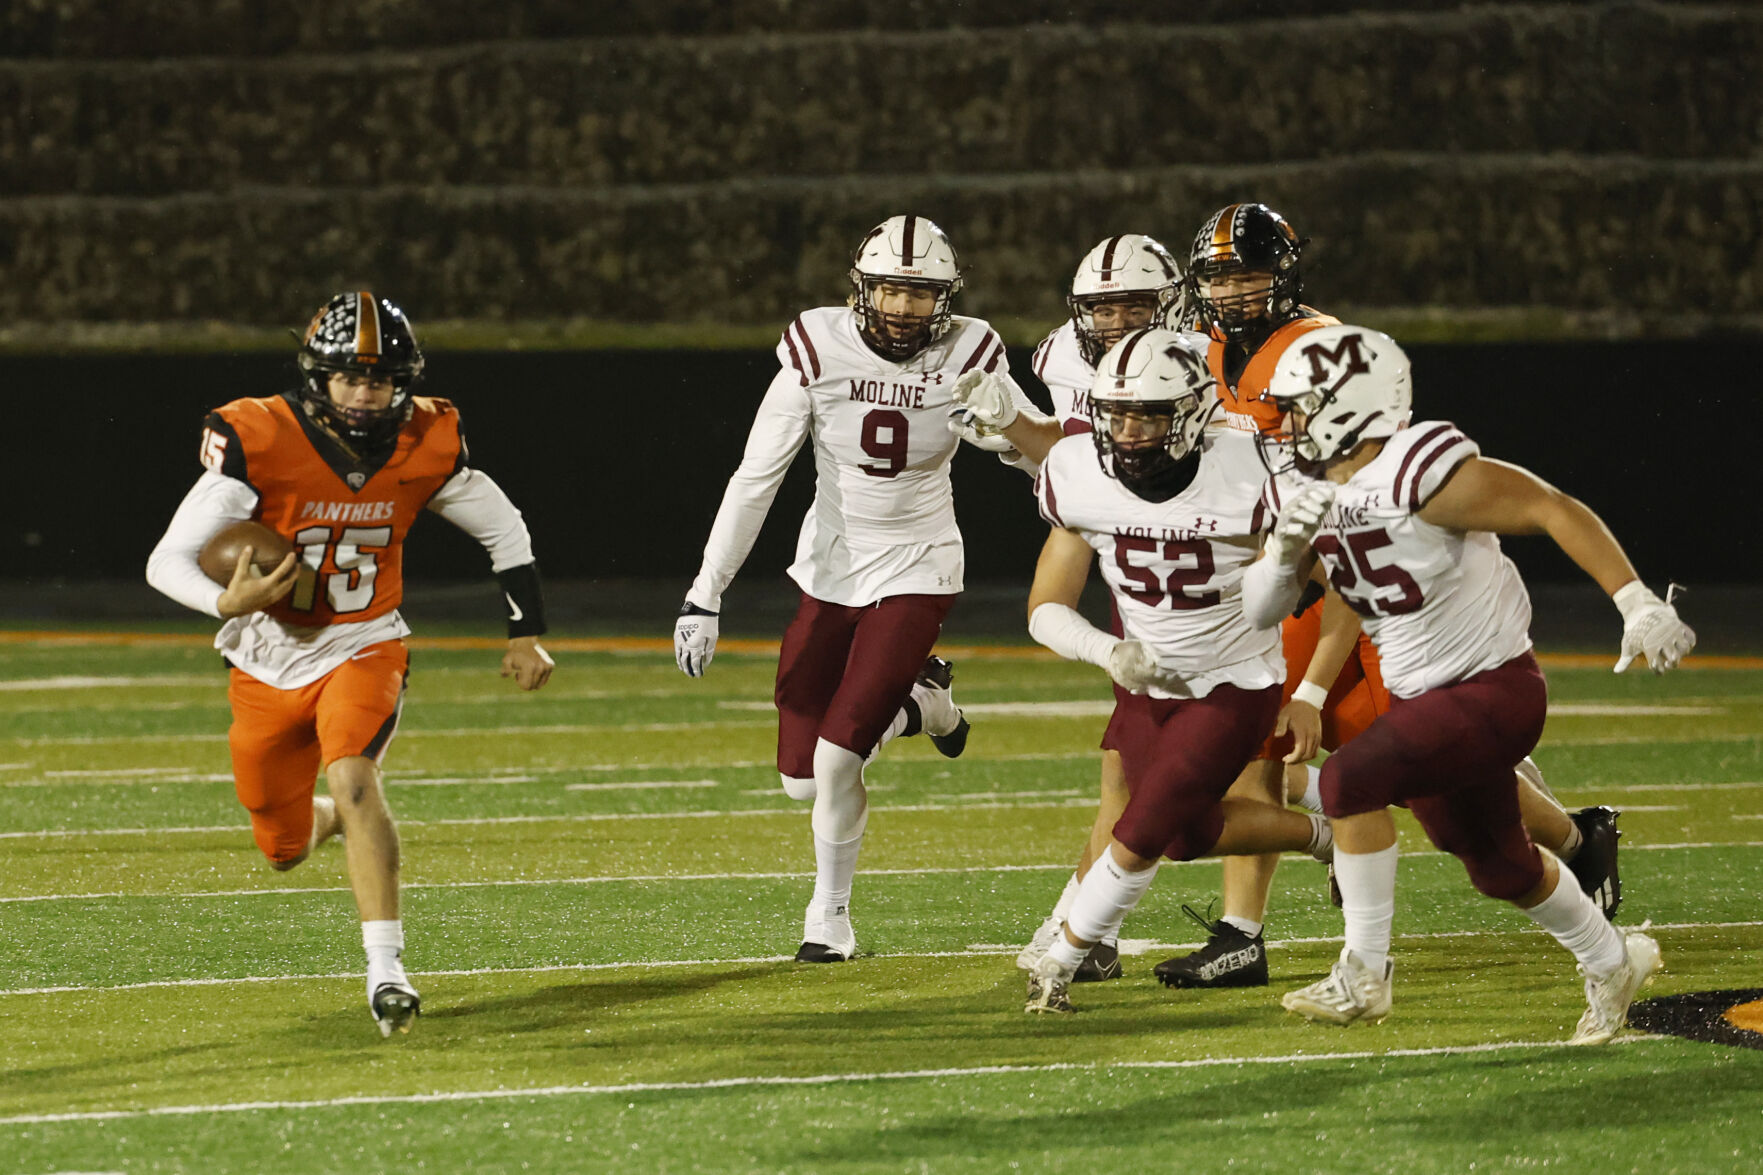 United Township Upsets Rival Moline in Last Home Game